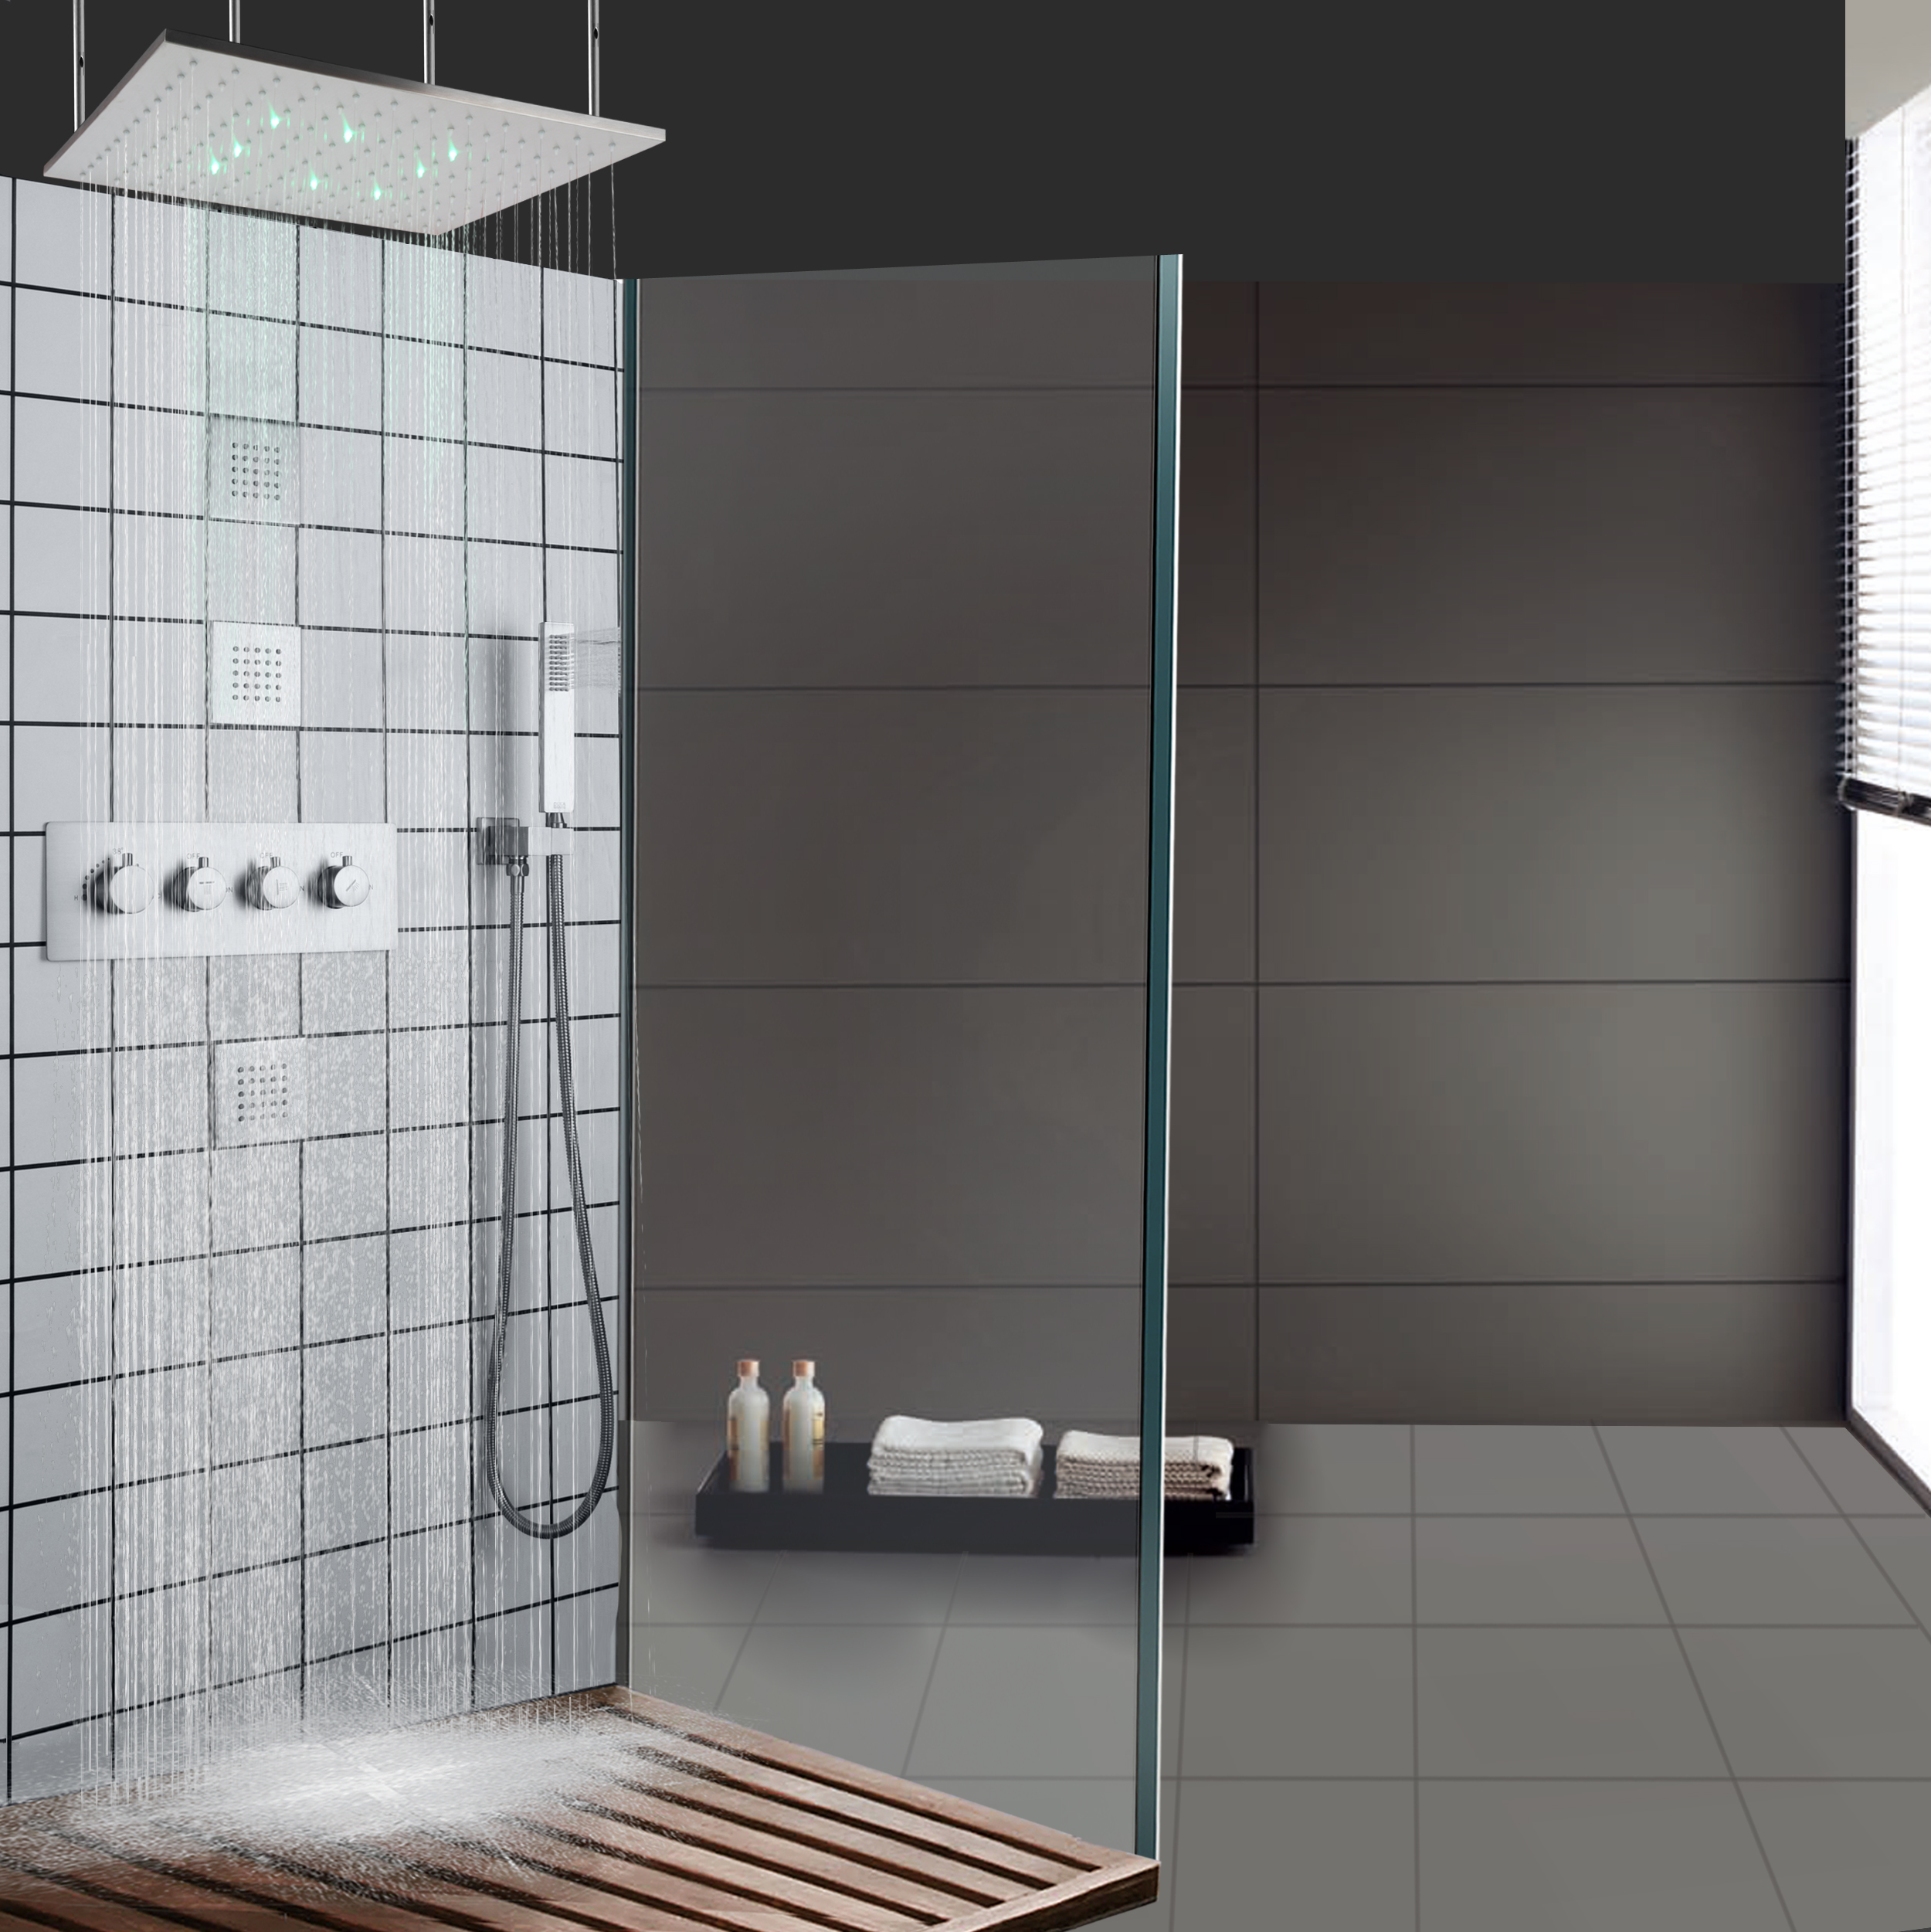 Brushed Nickel LED Thermostatic Bath Shower Faucet Rainfall With Brass Handheld Shower Arm